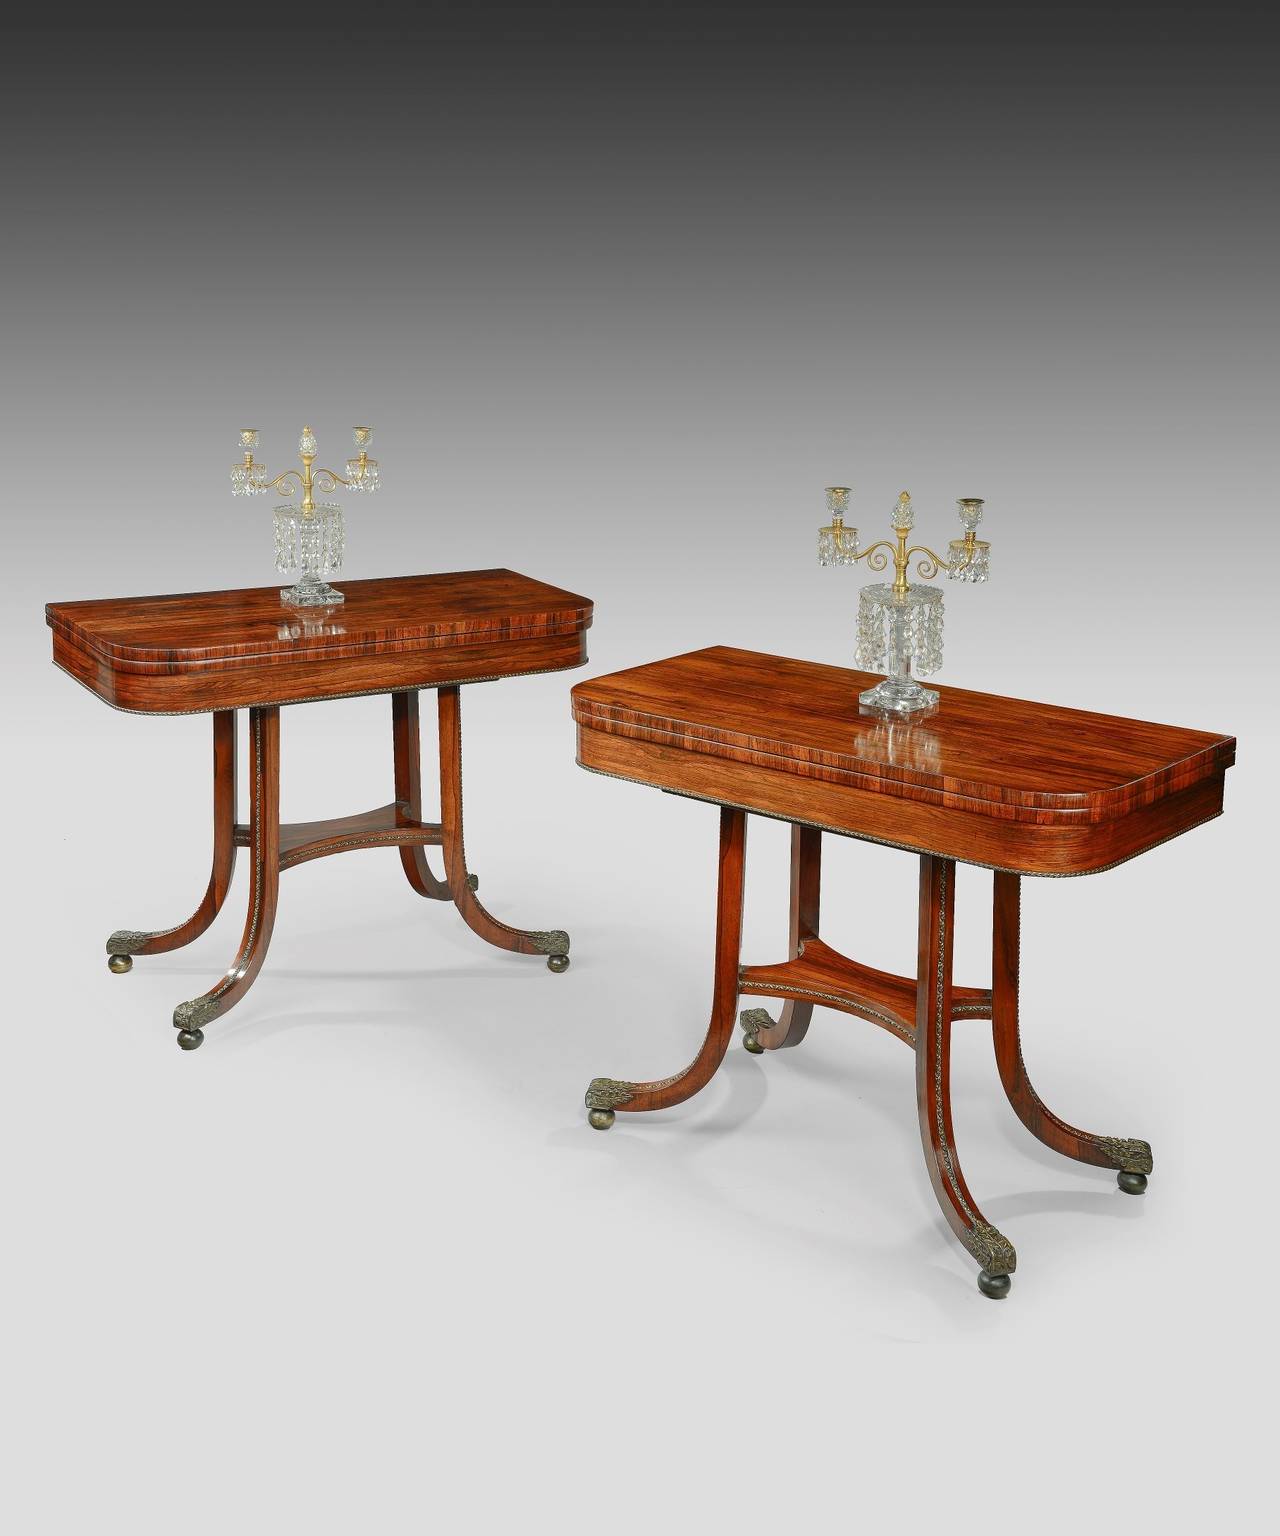 A handsome pair of Regency period rosewood veneered card tables; the well figured tops rotate and open to reveal a baize covered playing surface, raised on hockey stick legs which are decorated with ormolu and terminate in unusual oak leaf castors